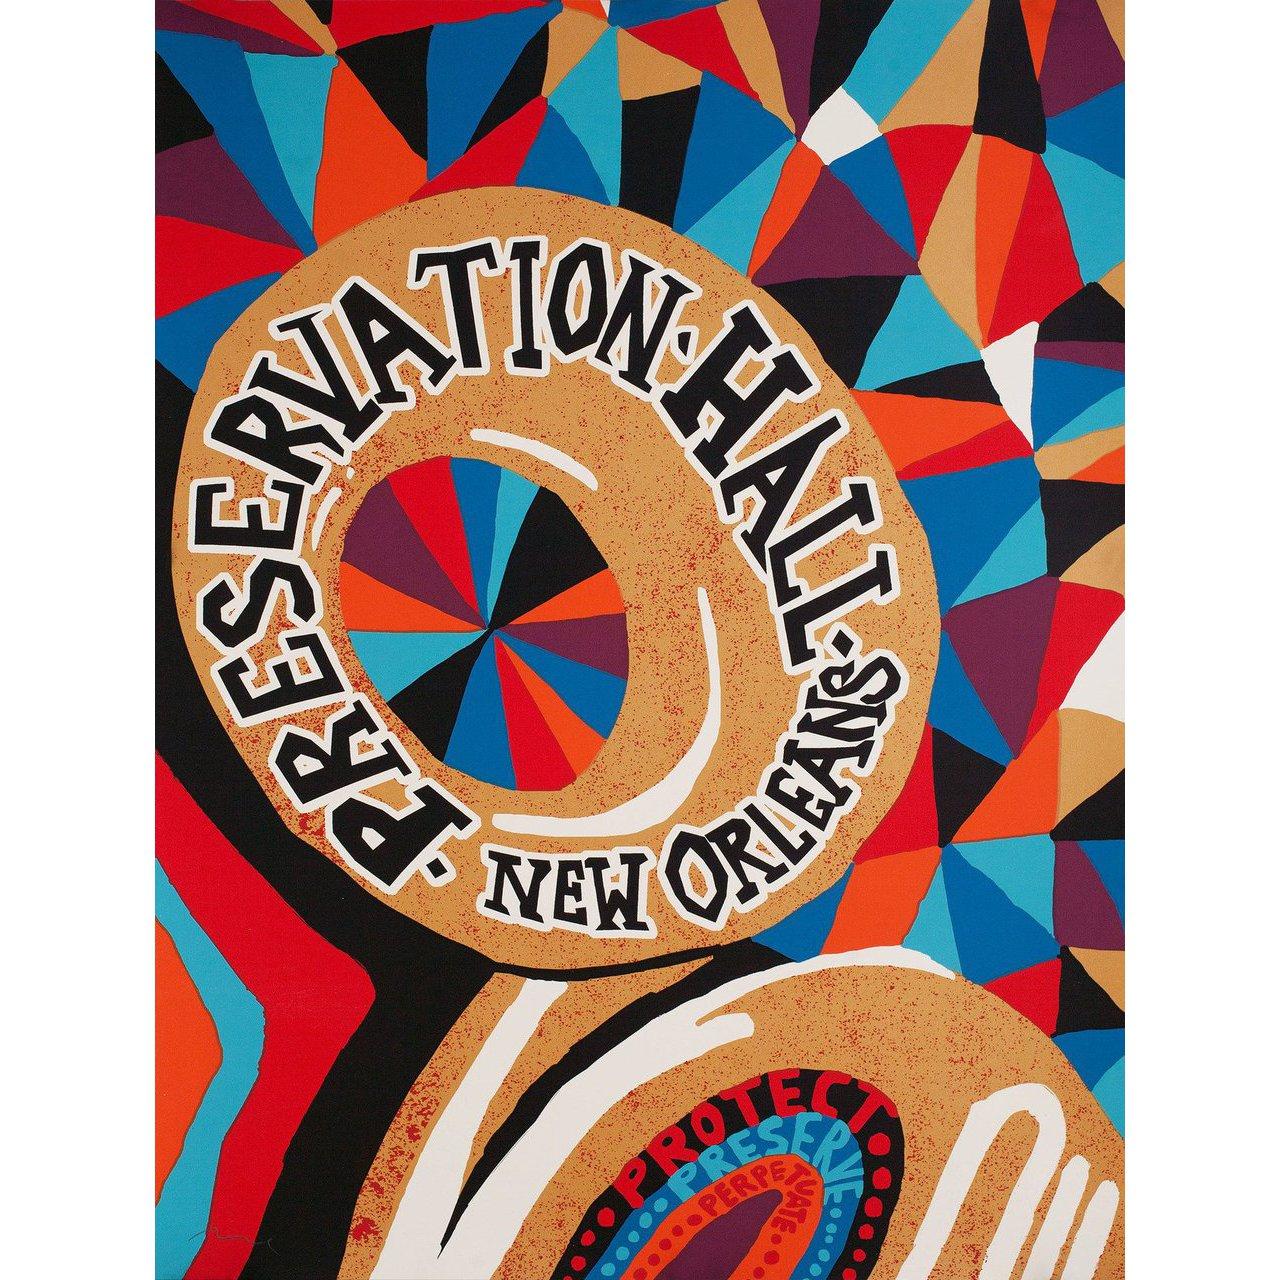 Original 2019 U.S. poster by Nate Duval for Preservation Hall (2019). Fine condition, rolled. Please note: the size is stated in inches and the actual size can vary by an inch or more.
     